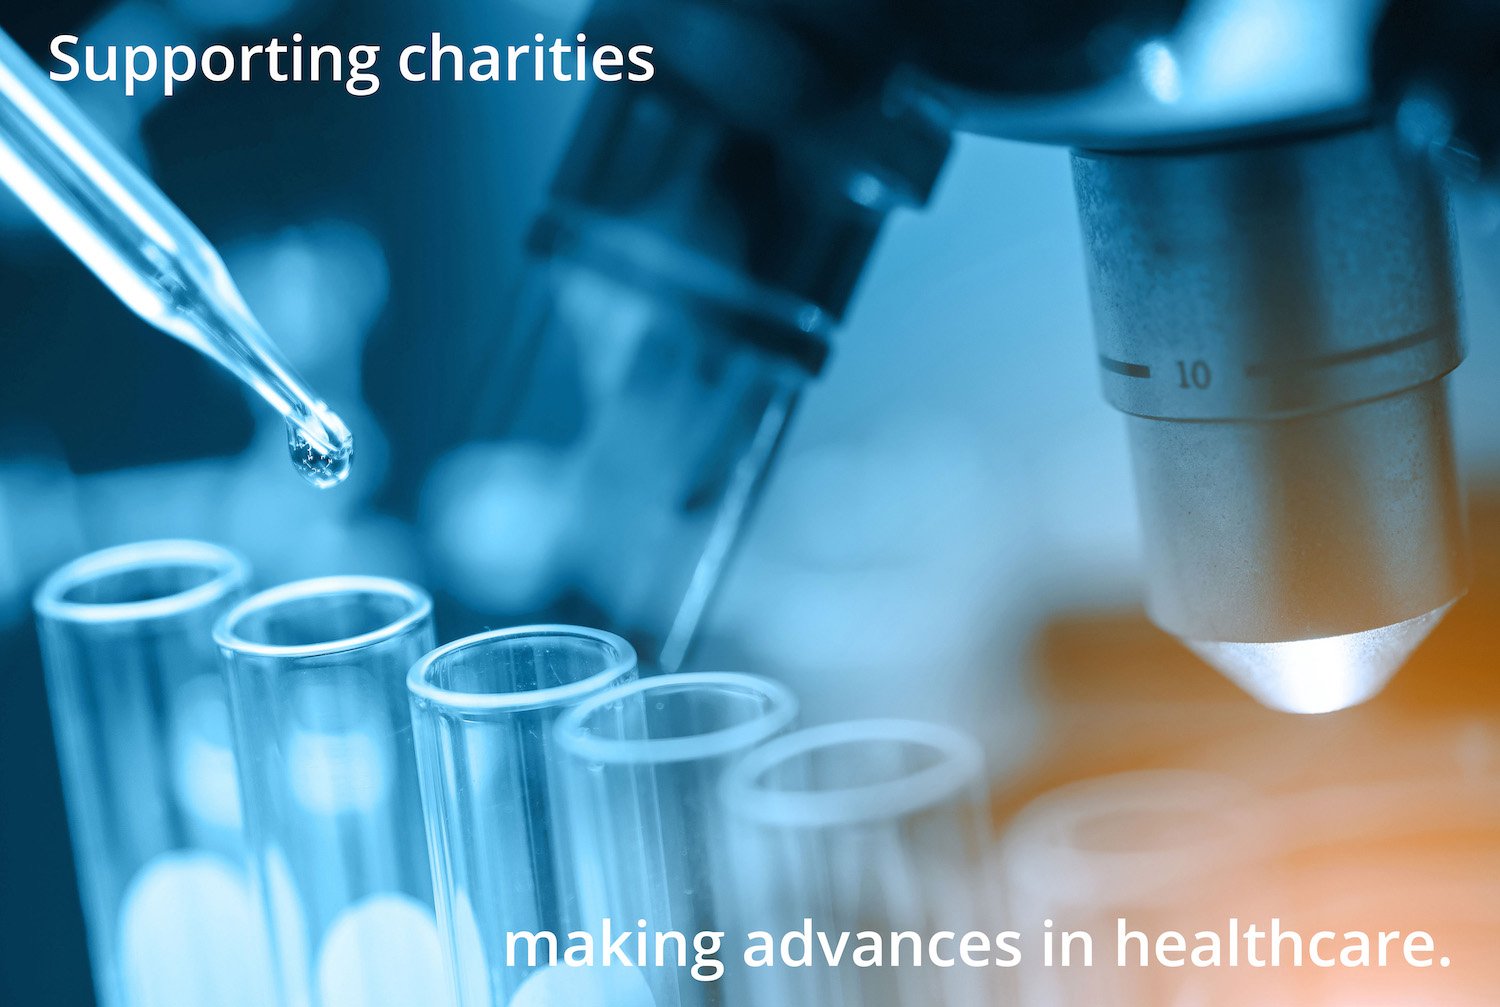 Supporting charities making advances in healthcare